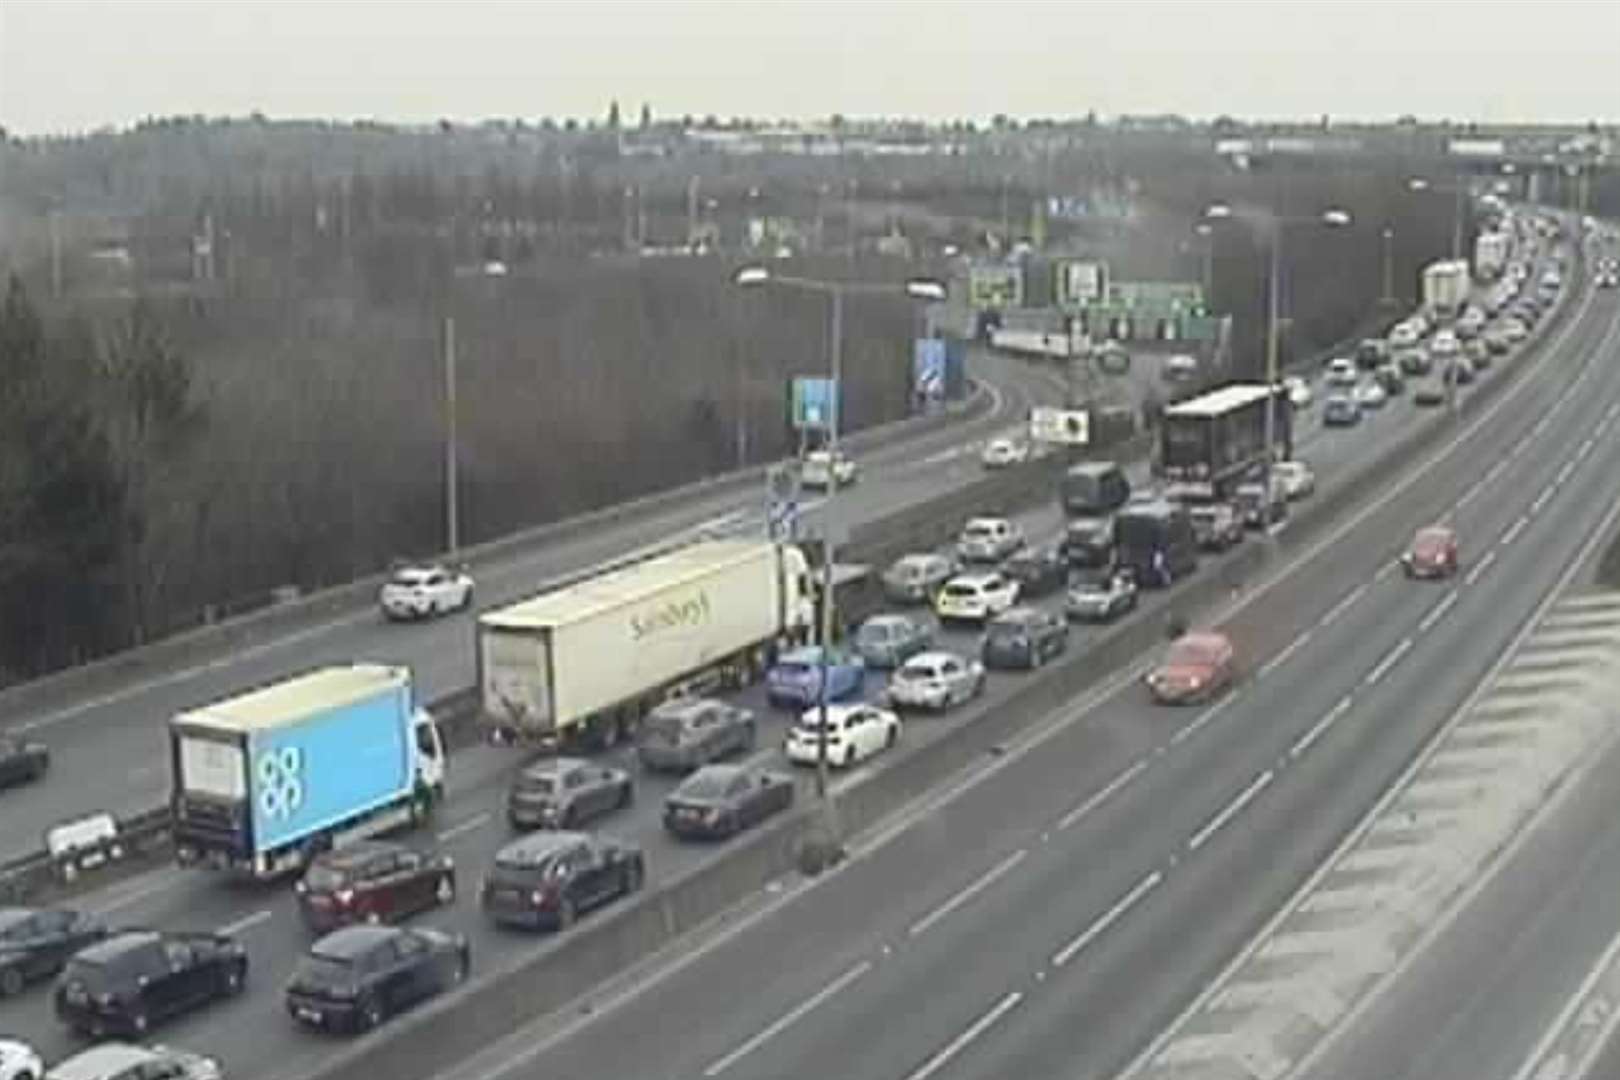 Traffic in the Dartford area following the crash by the Dartford Crossing. Picture: Highways England